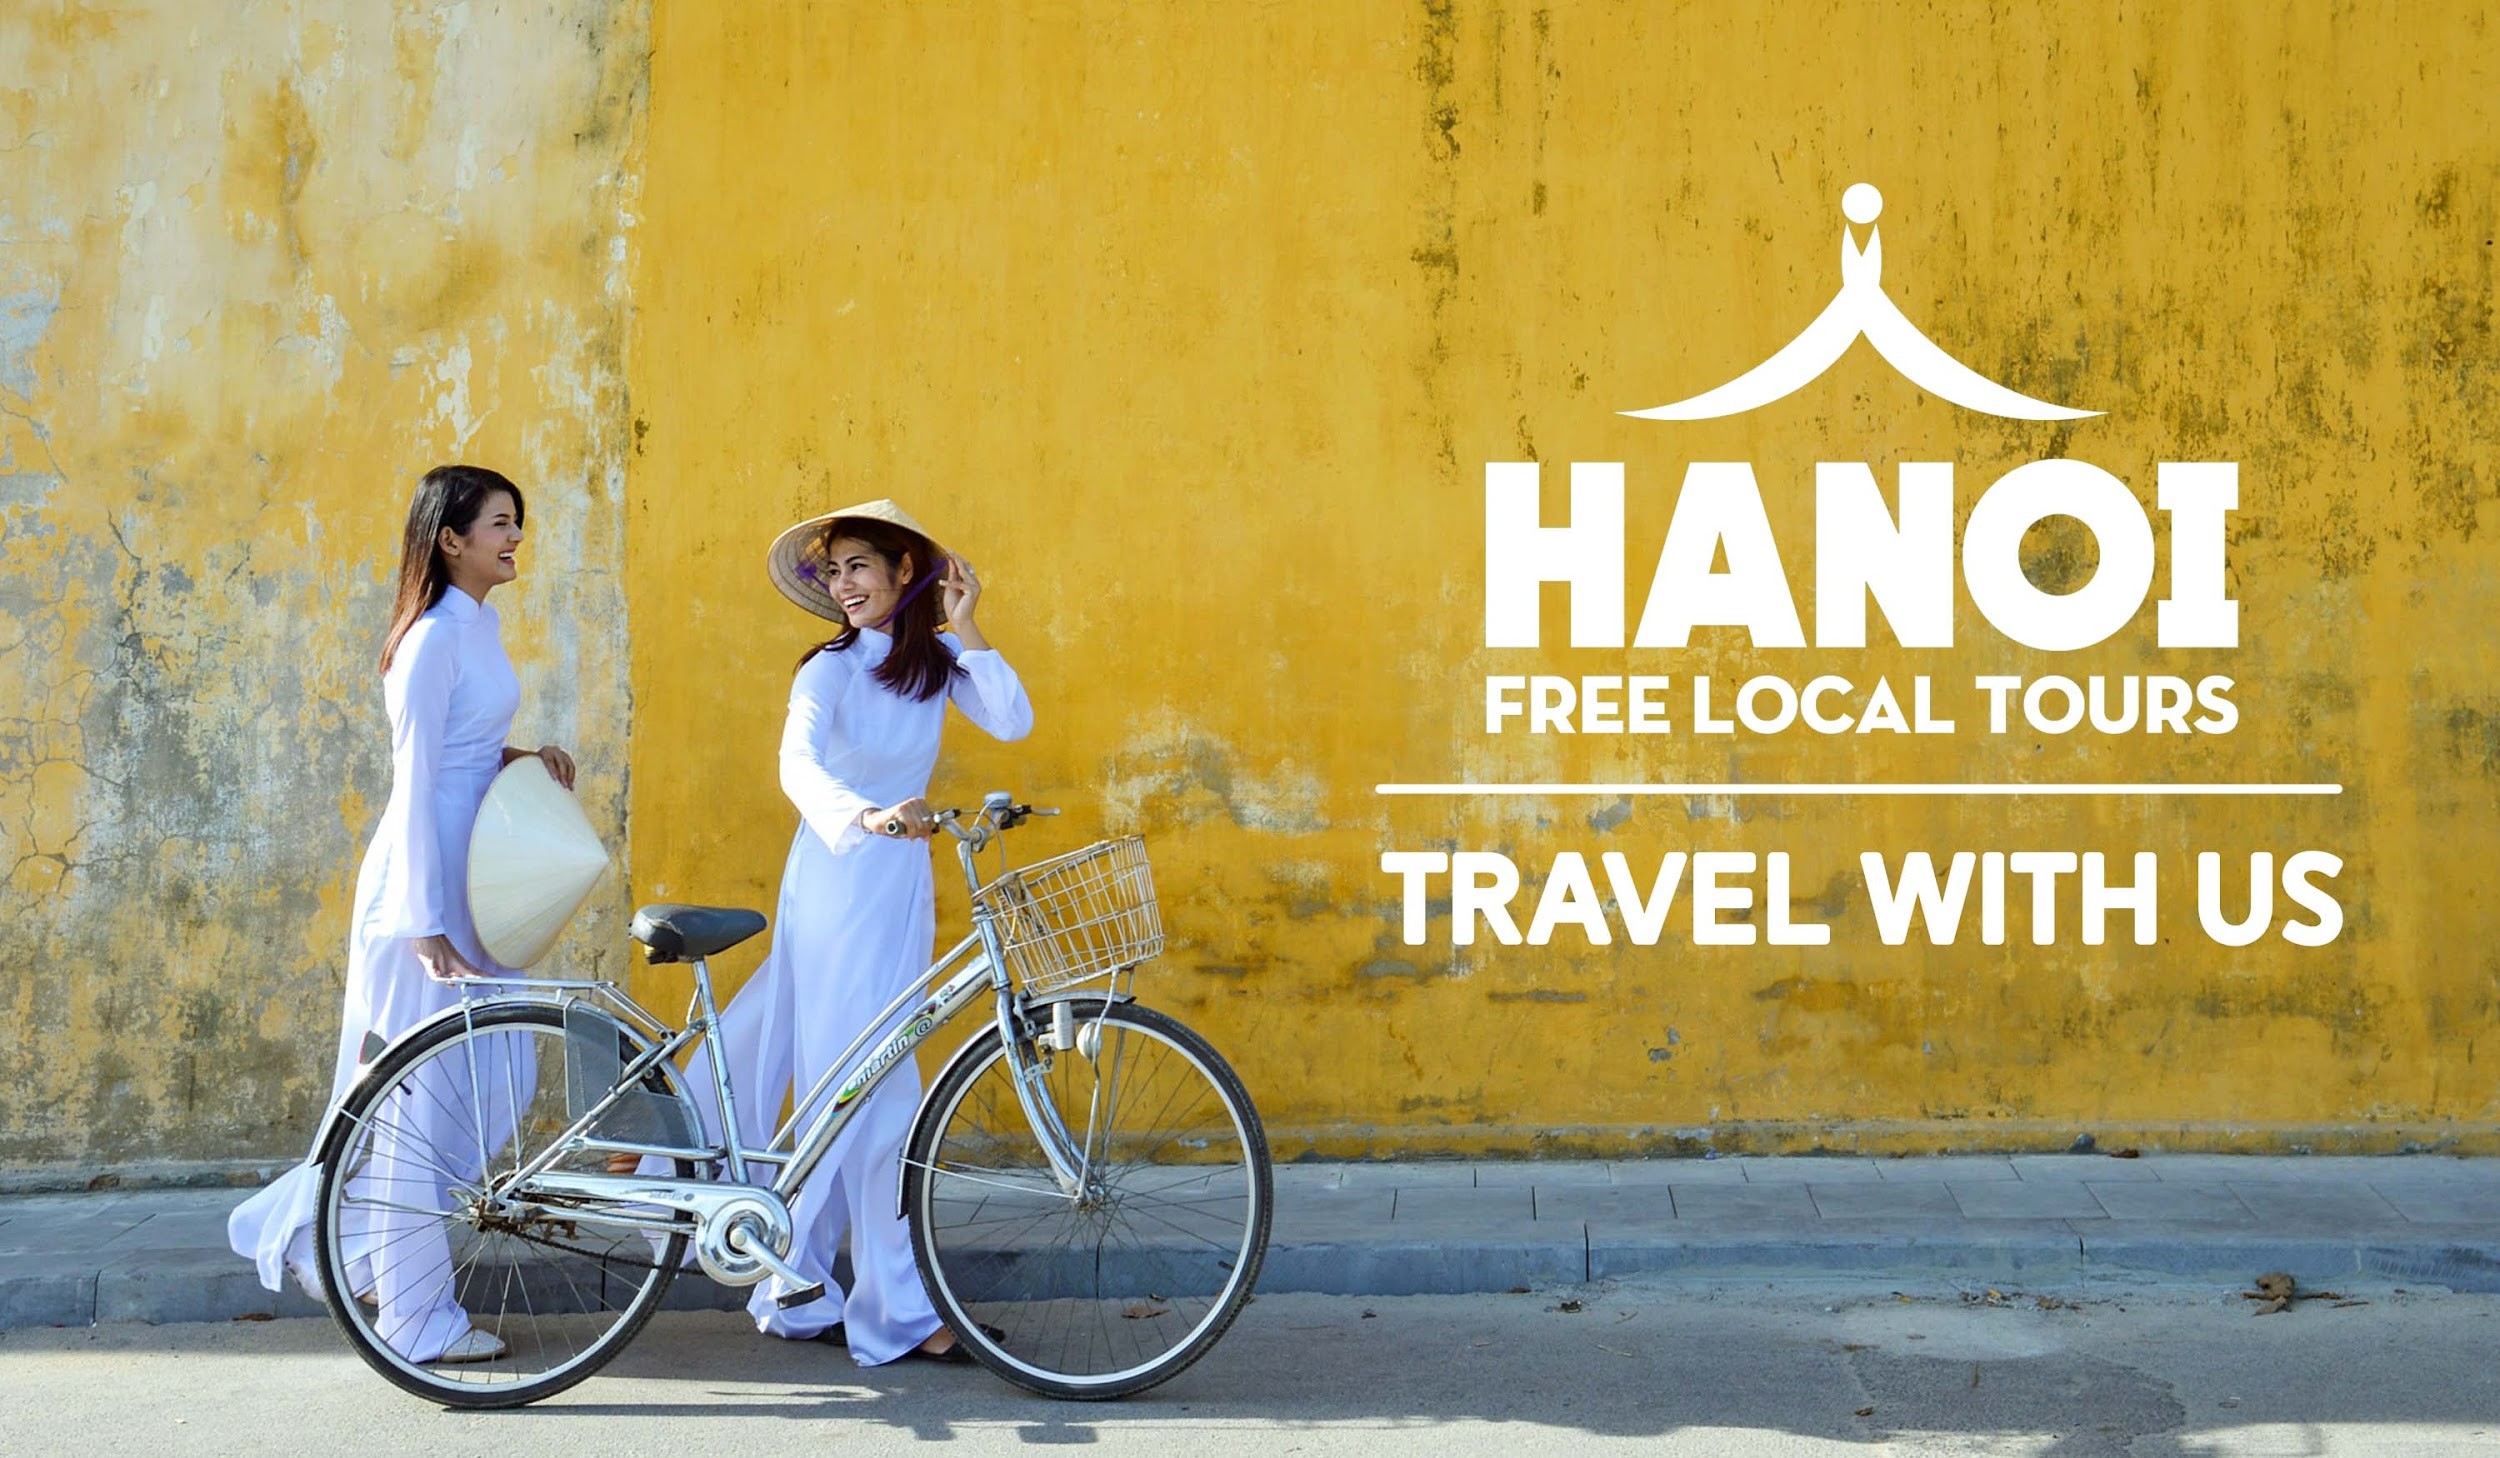 Travel with Hanoi Free Local Tours to get the best local experience ever